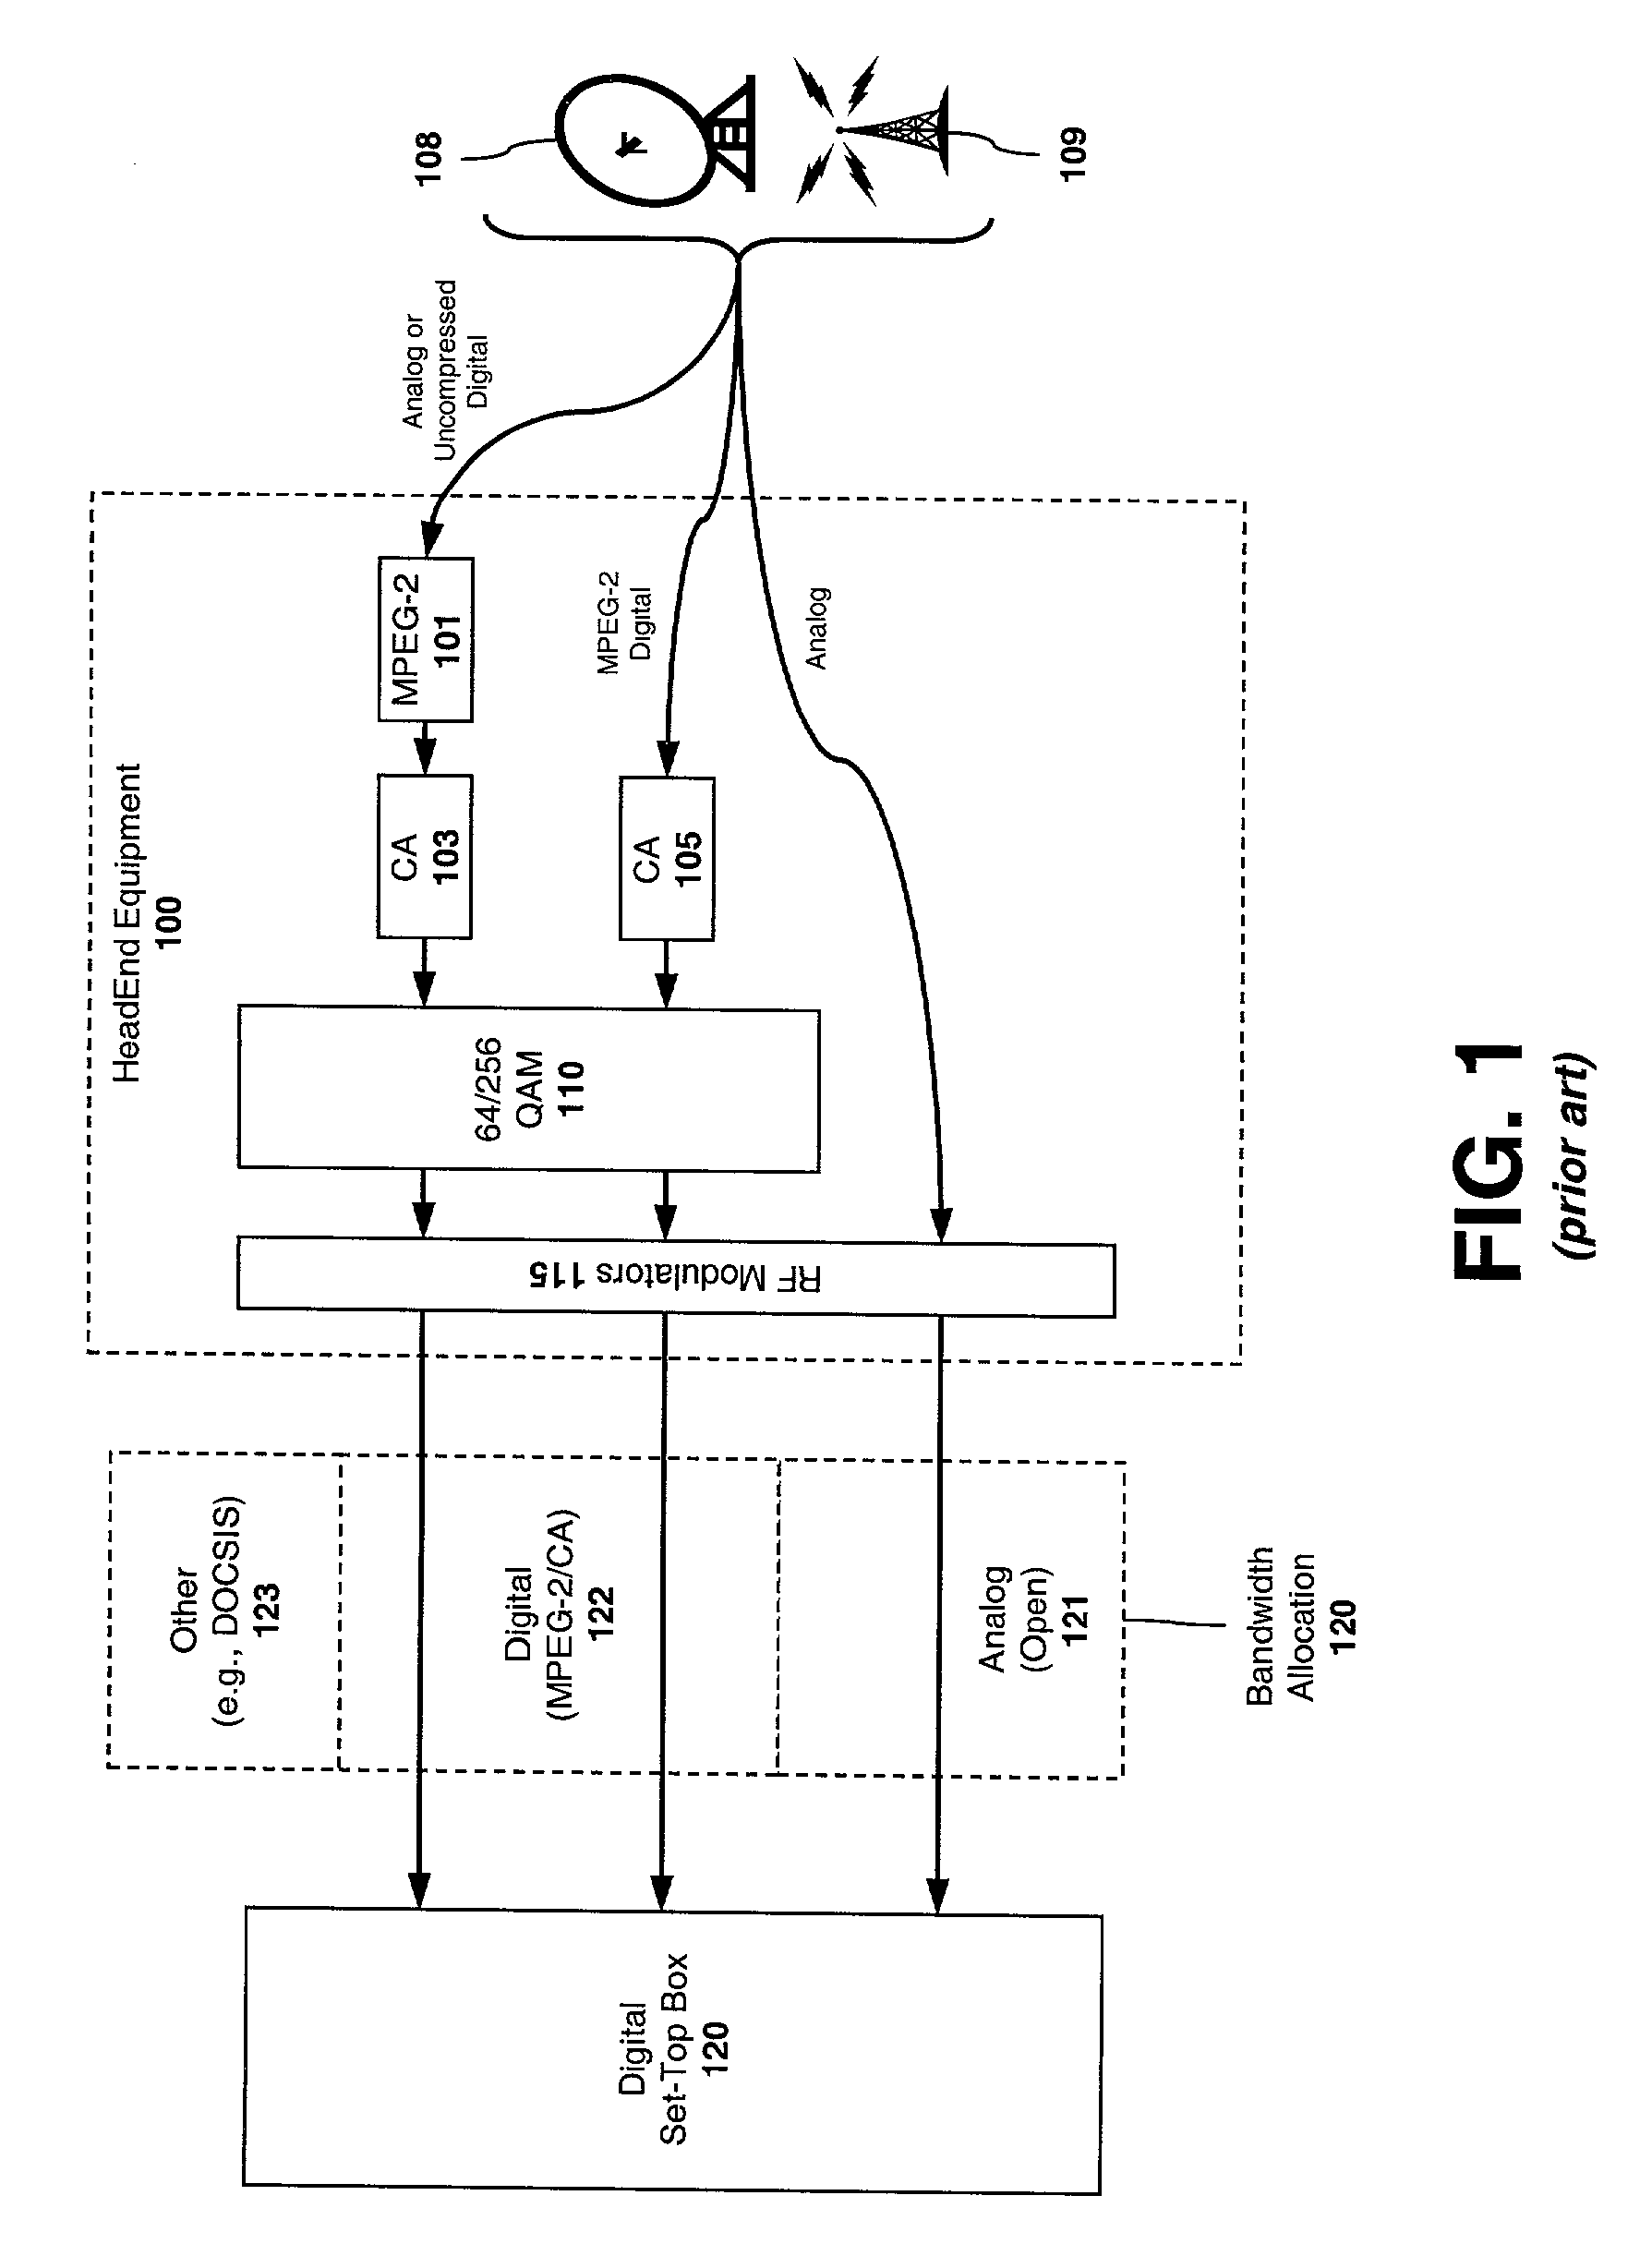 System and method for improved multi-stream multimedia transmission and processing